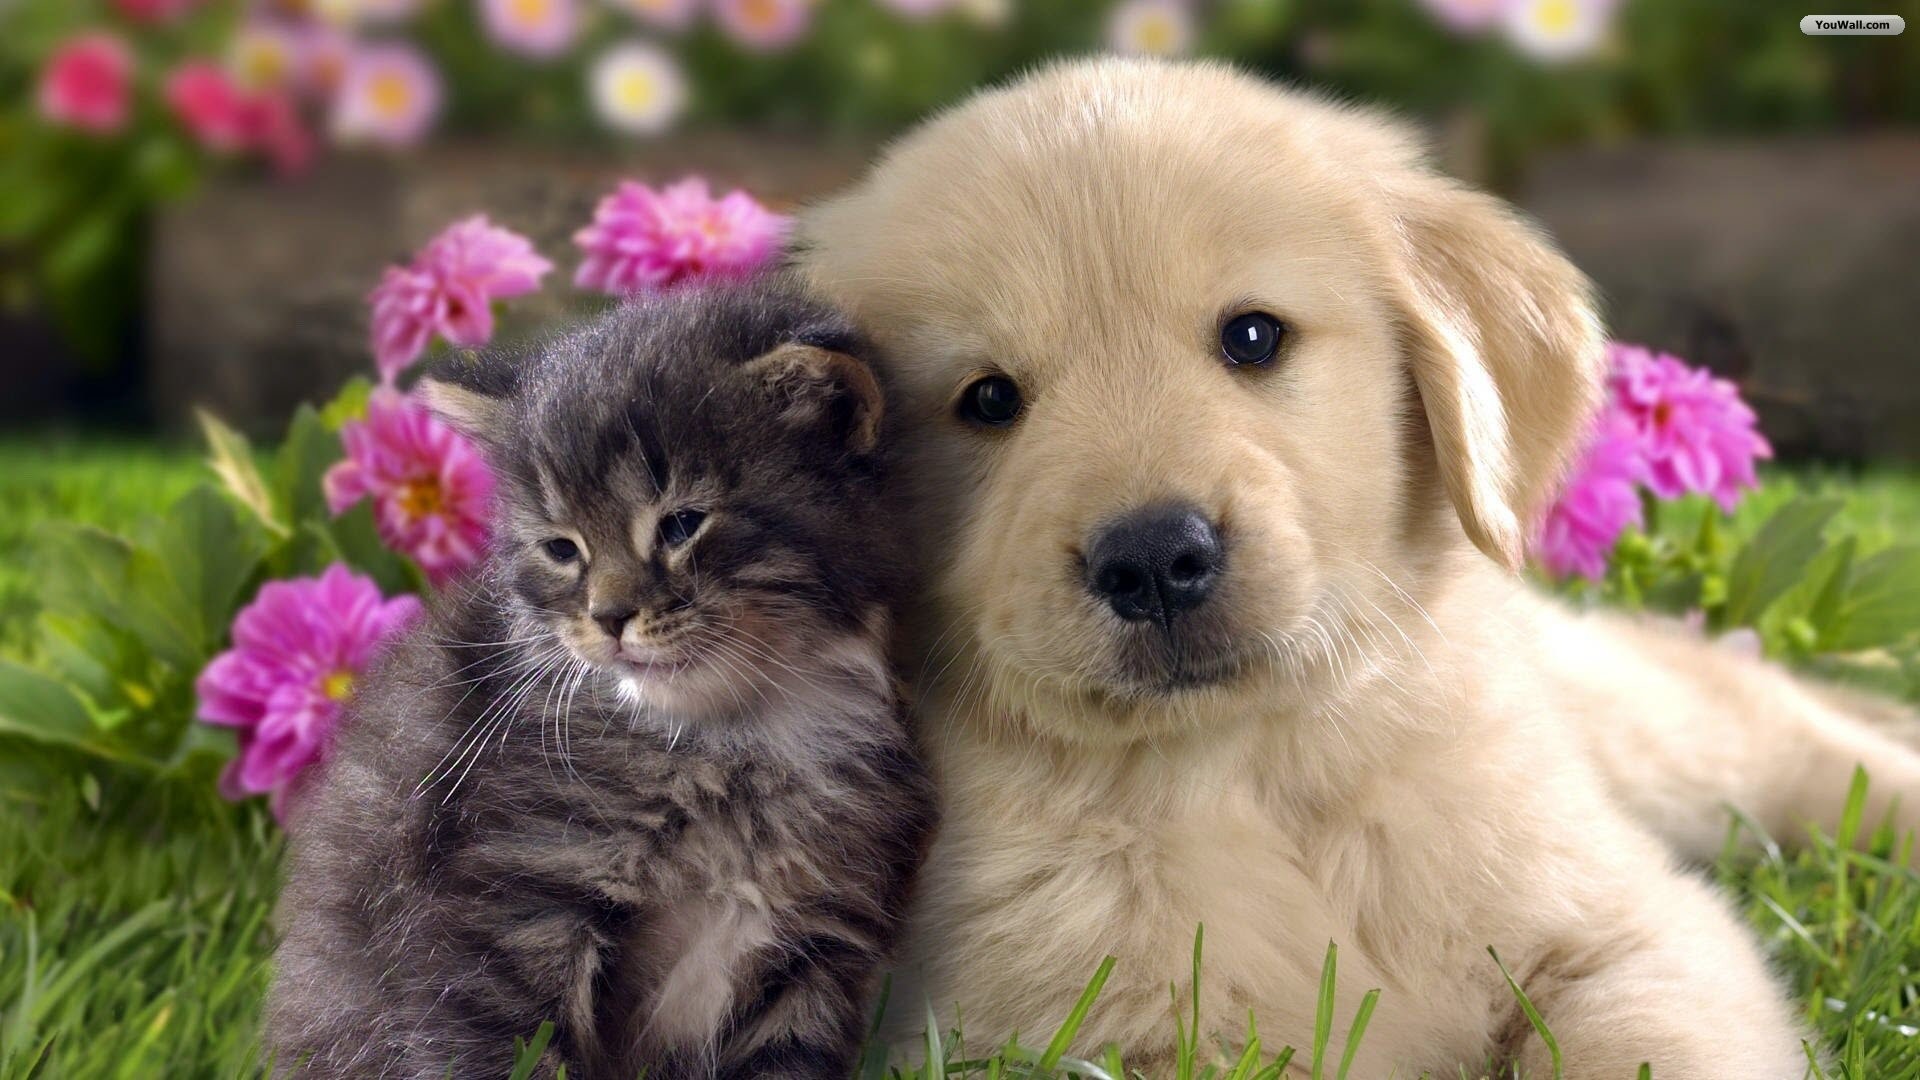 1920x1080 wallpapers,image,free images,Cats wallpapers,Cats,Dogs .